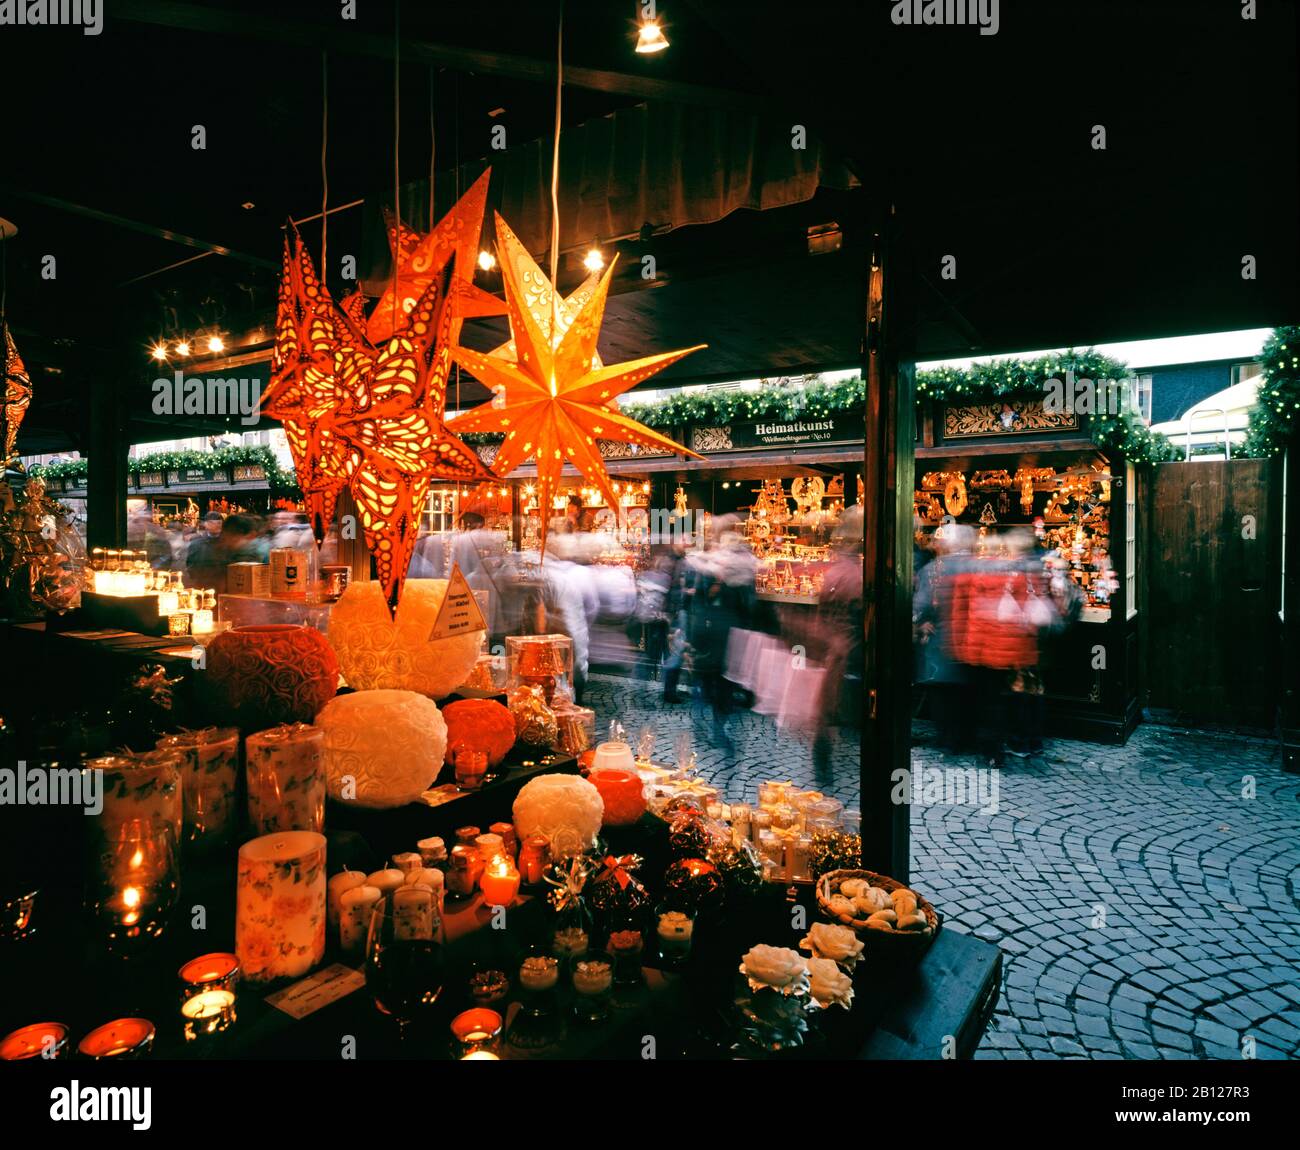 Christmas market in the old town, Cologne, Germany Stock Photo